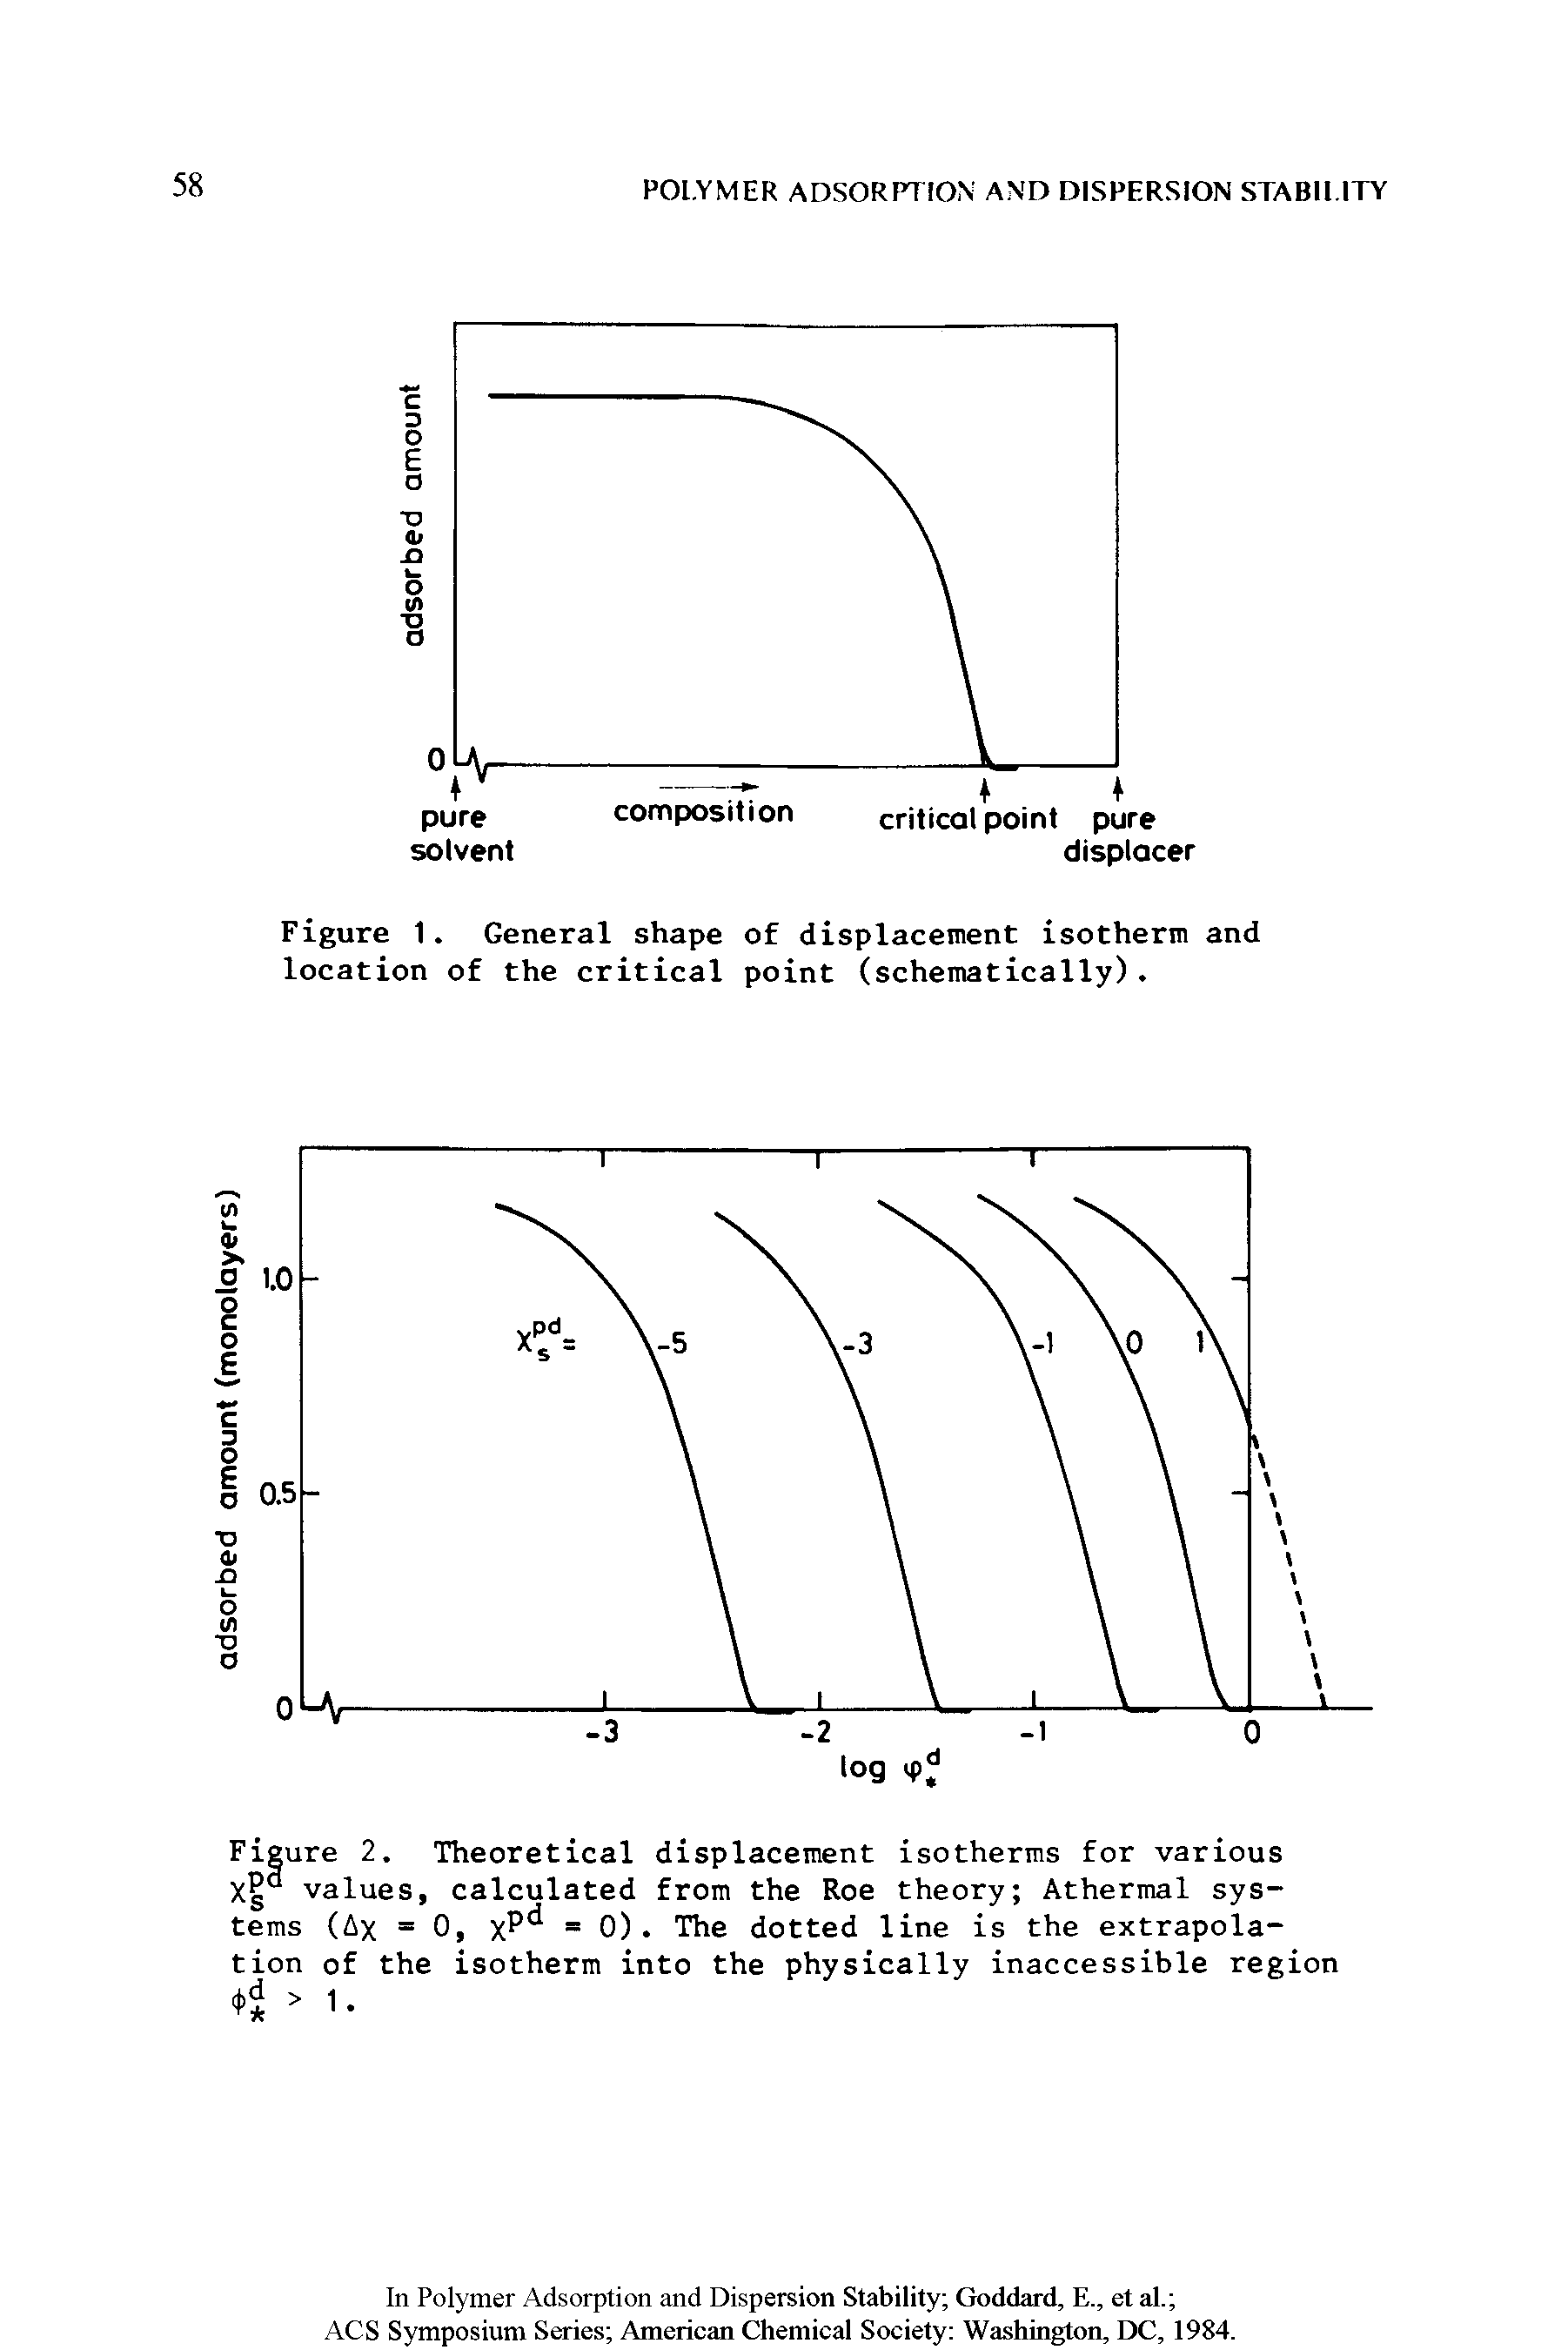 Figure 1. General shape of displacement isotherm and location of the critical point (schematically).